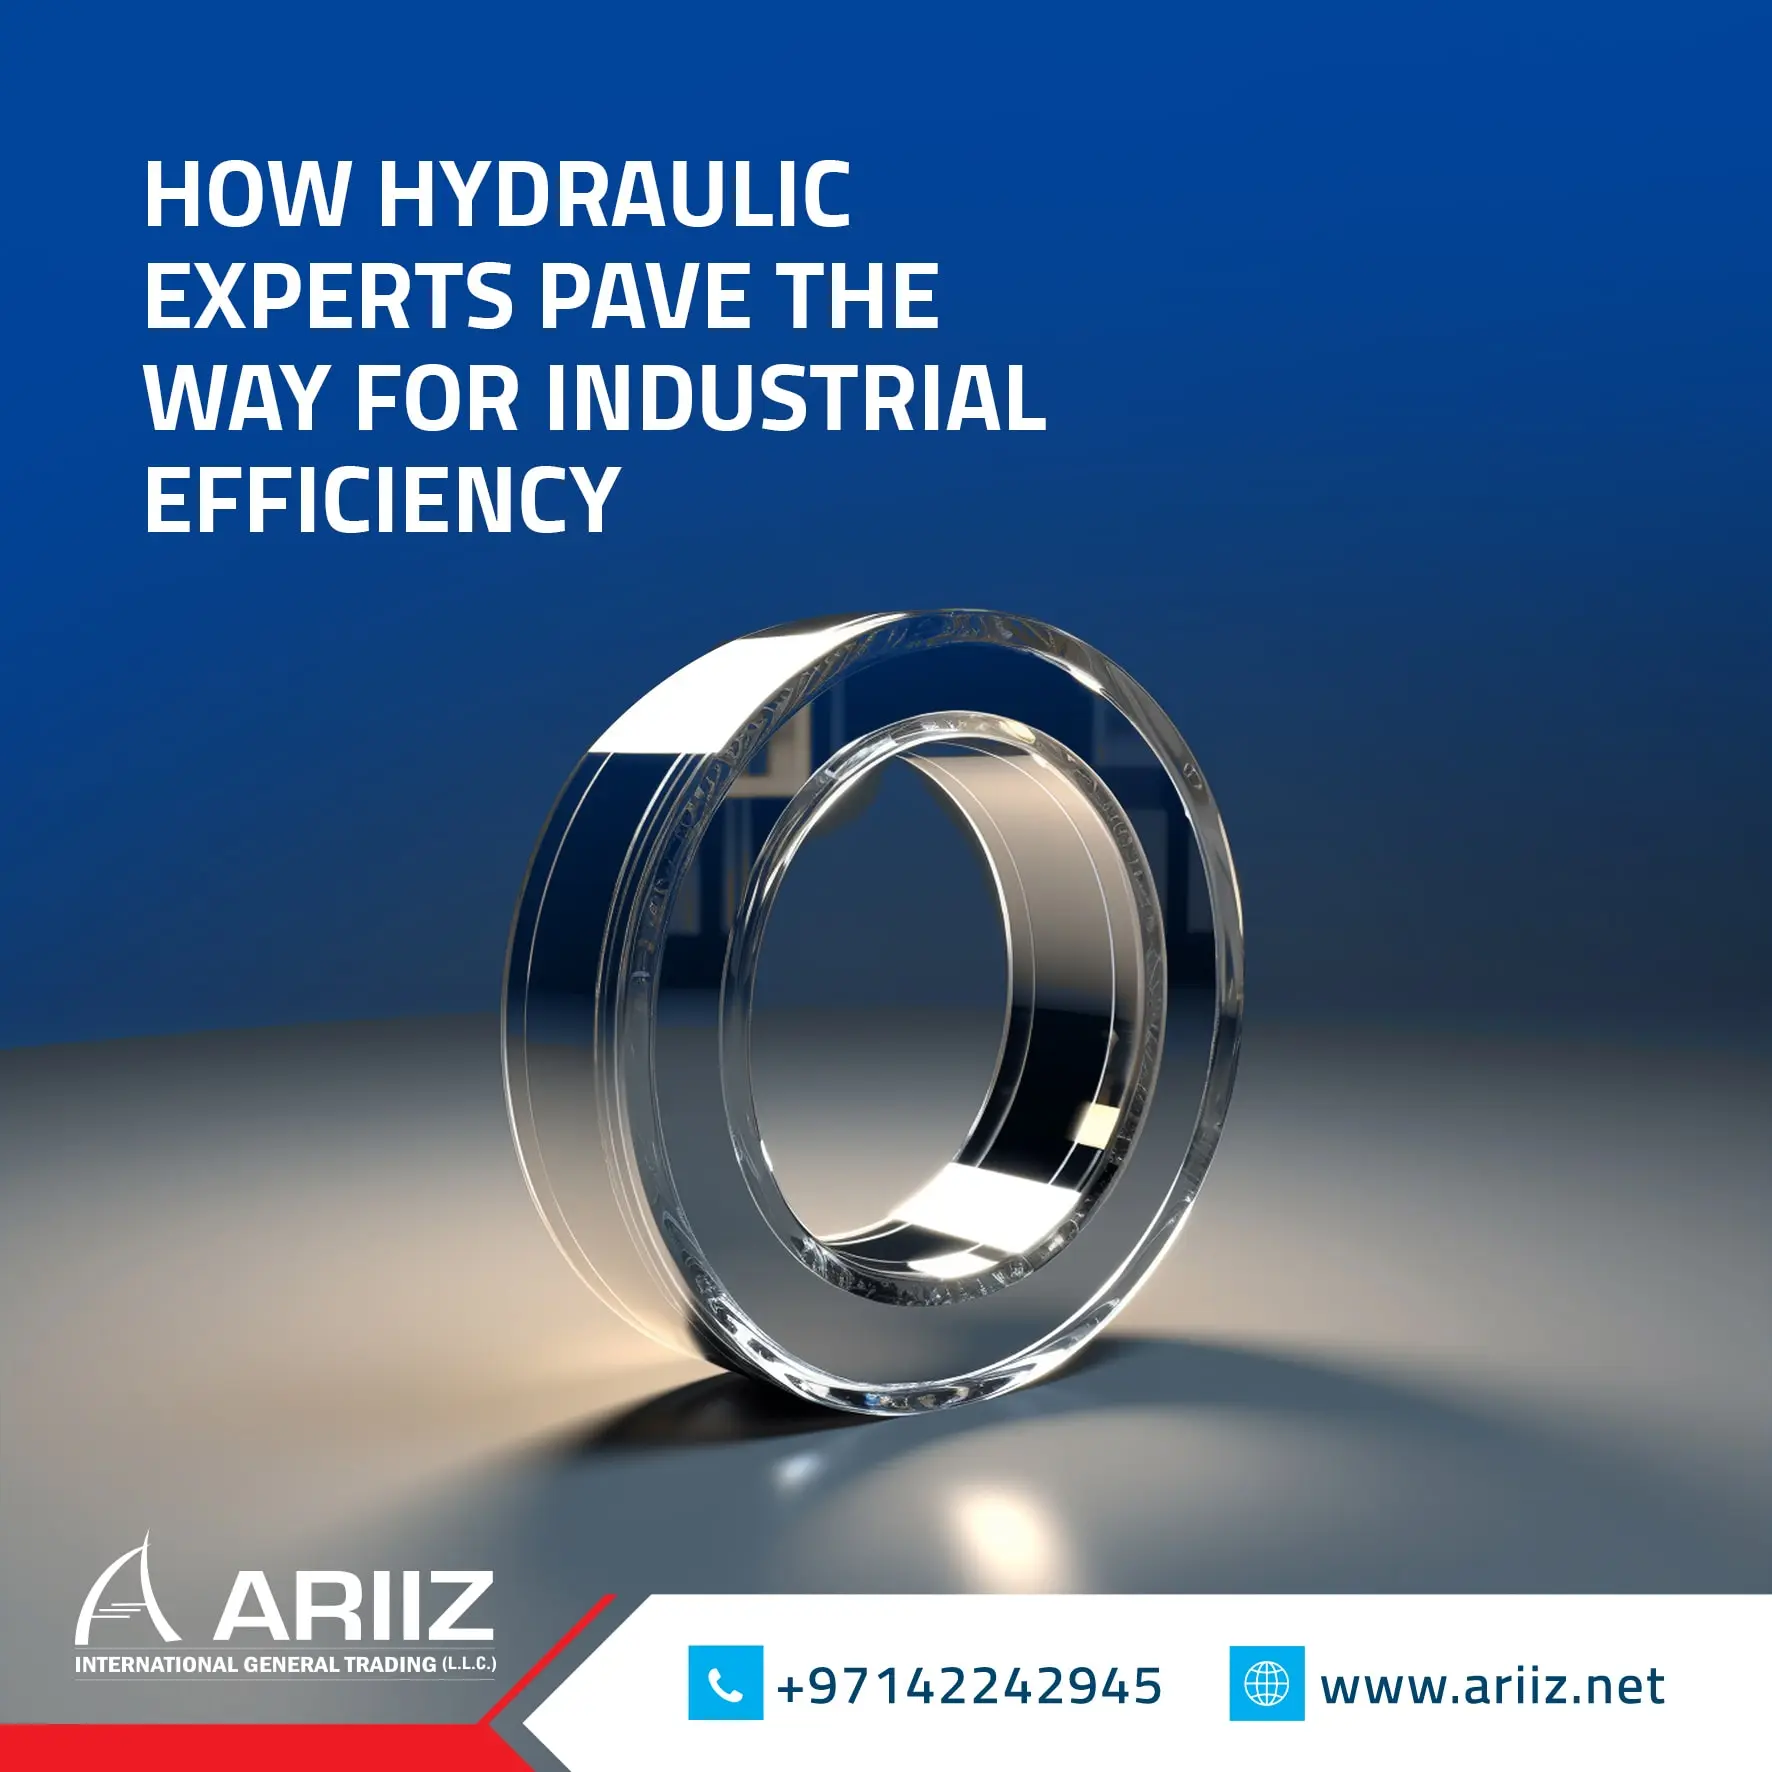 Hydraulic seal experts